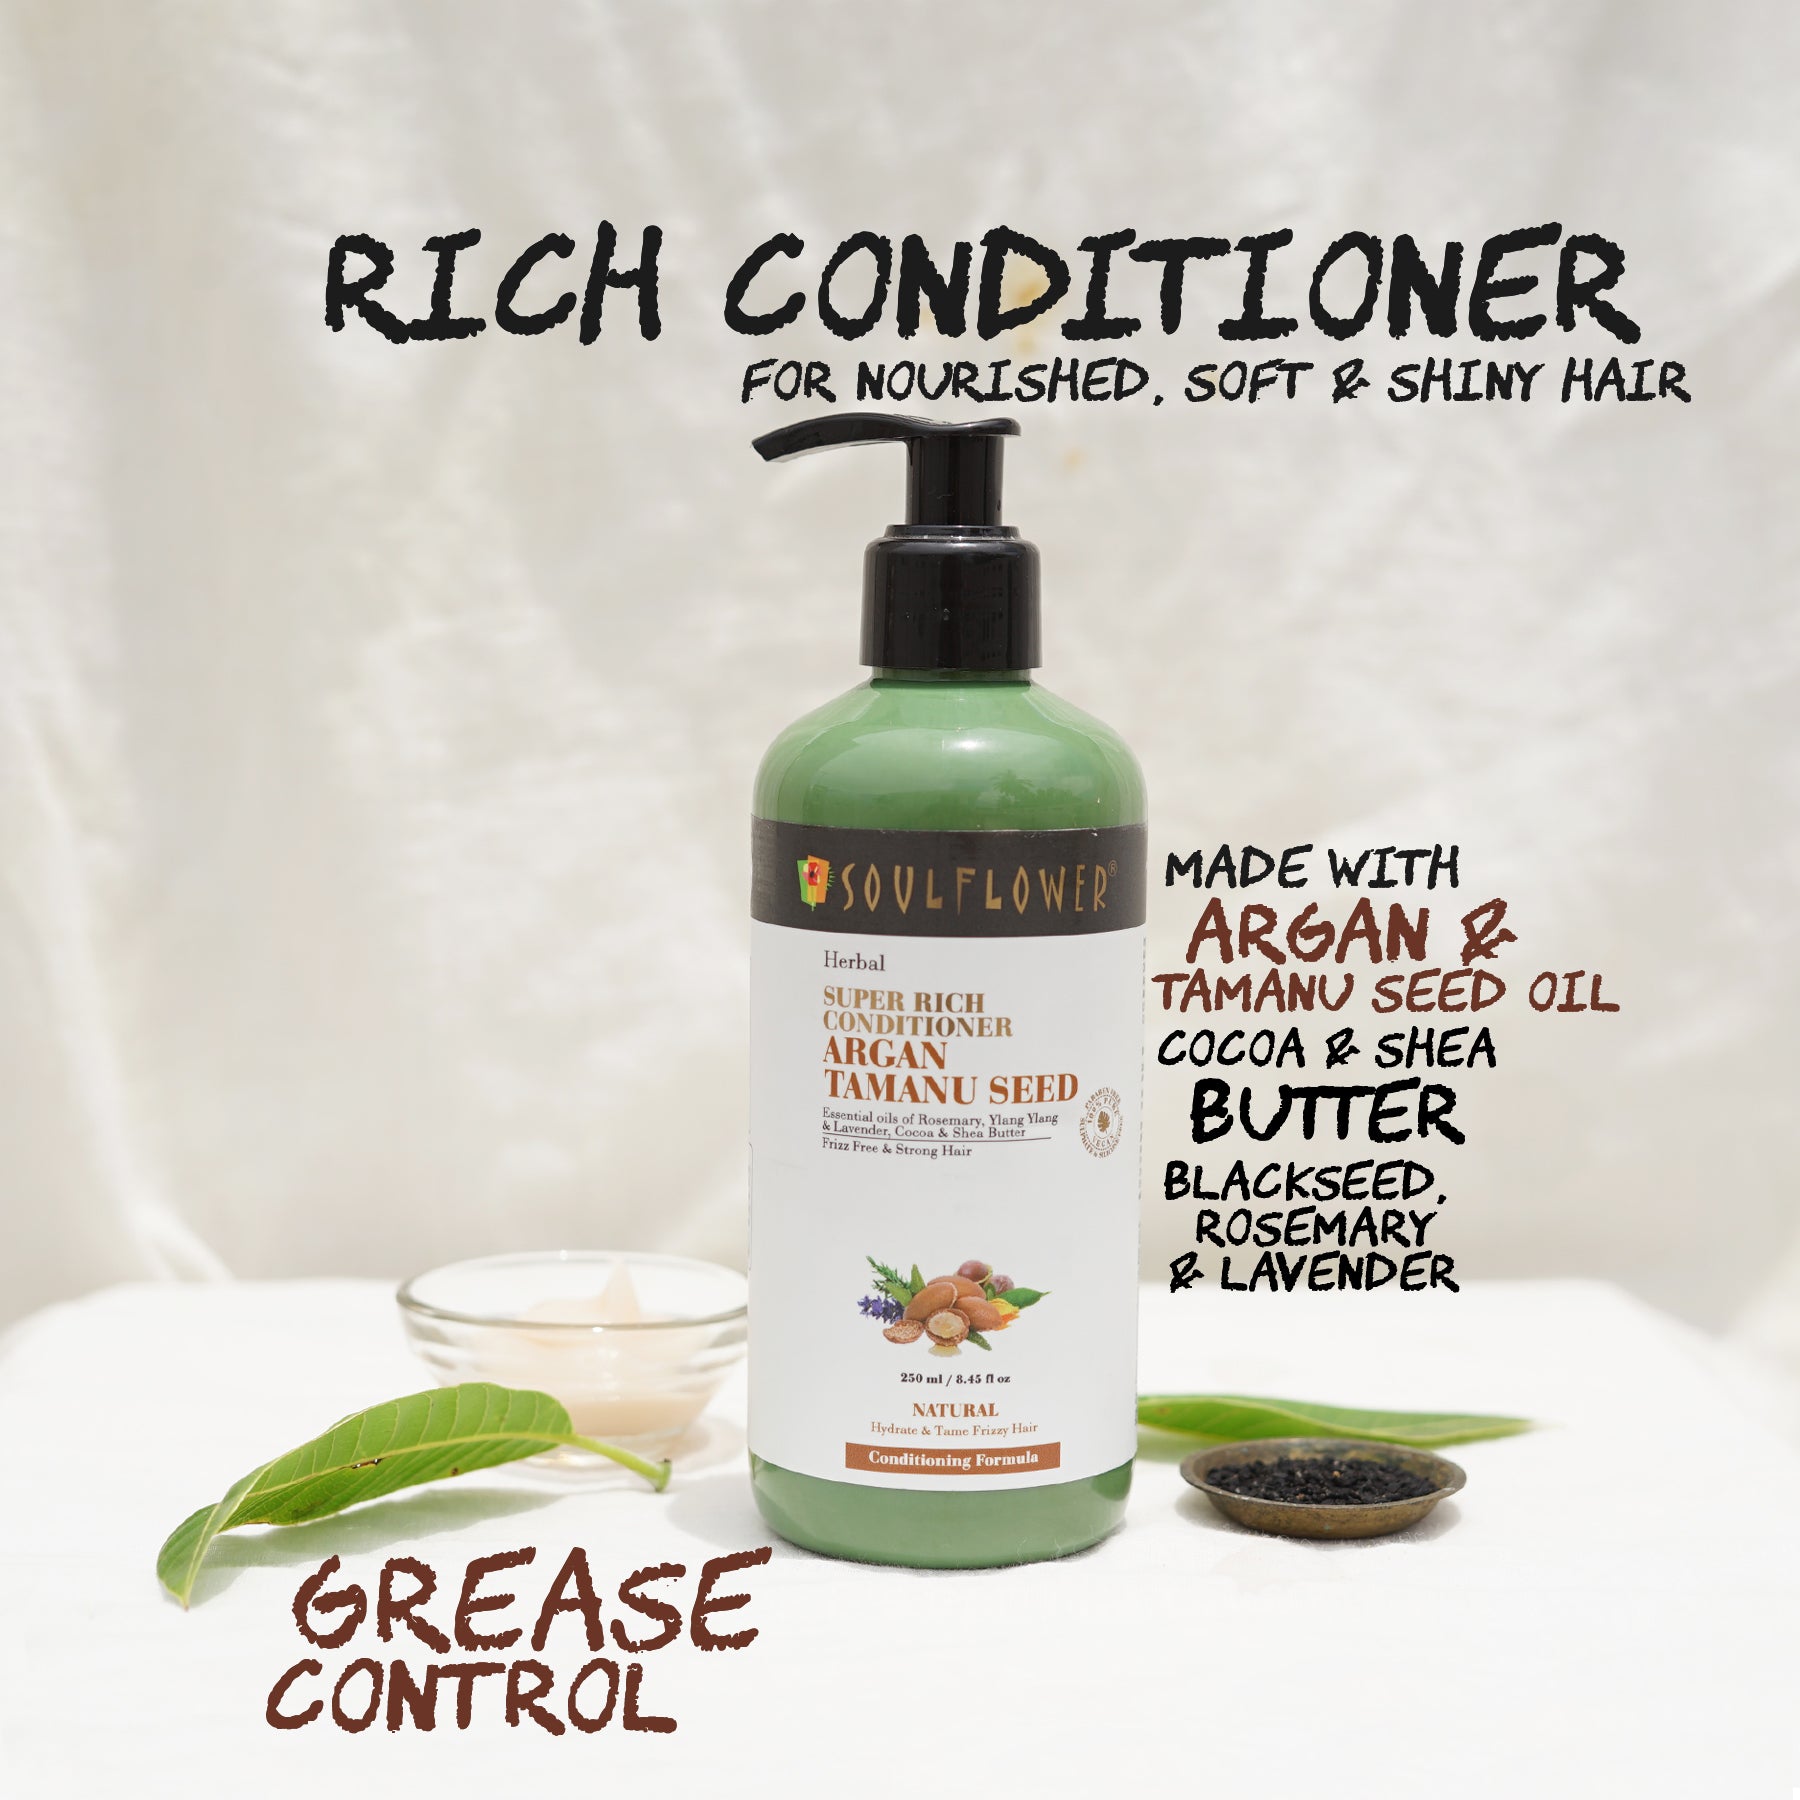 Herbal Super Rich Conditioner for Dry, Damaged & Frizzy Hair, Control Hair Fall with Argan & Tamanu Seed